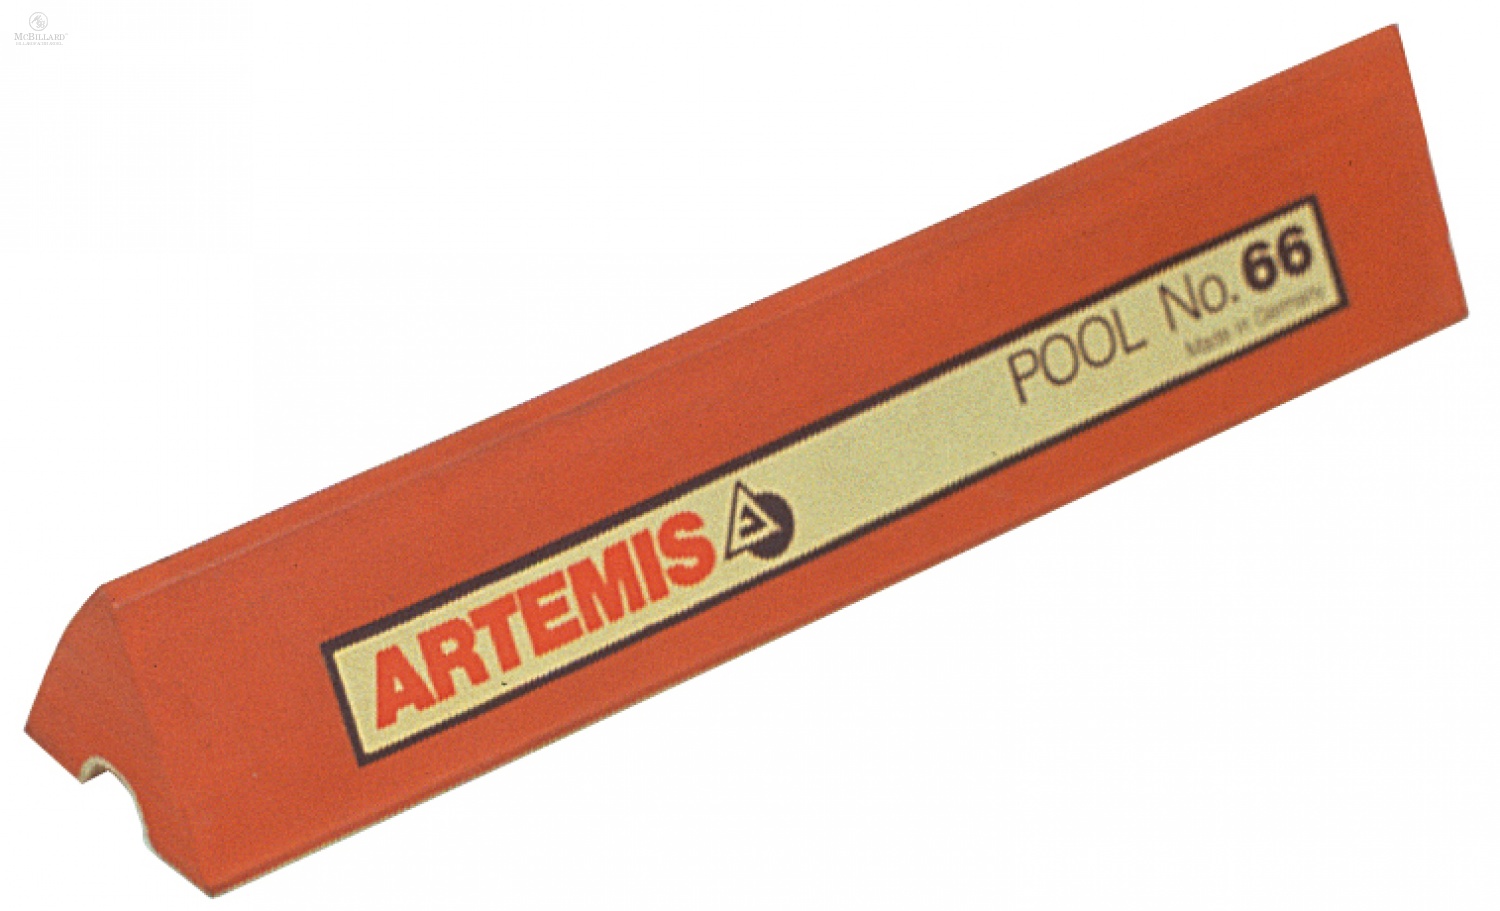 Table Supplies - Artemis rubber table cushions - 9 ft. pool billiards, 1 set